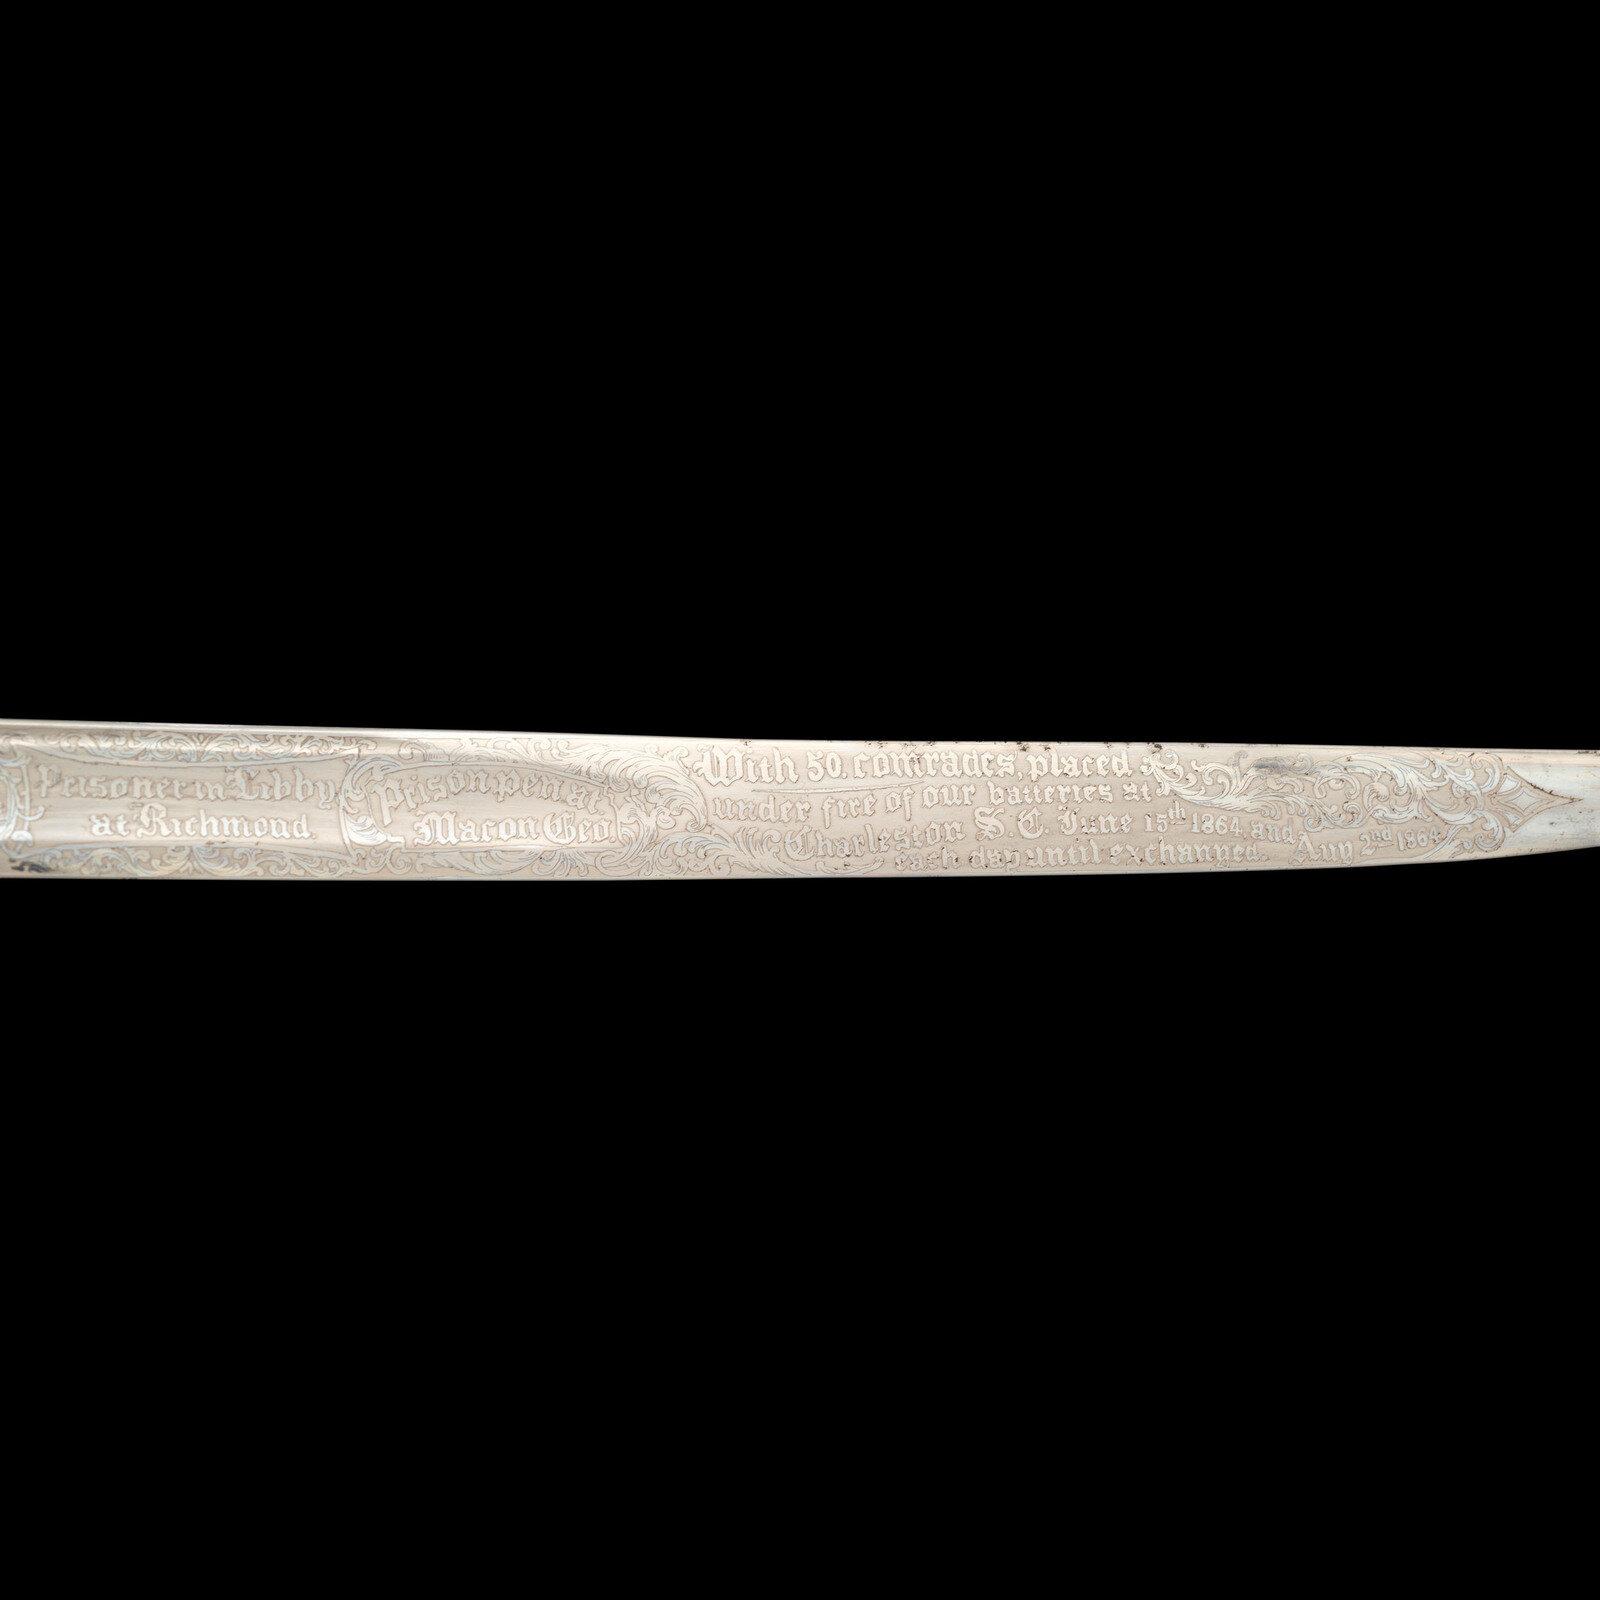 Exceptional Etched Blade Ames US Model 1850 Foot Officer Sword Presented to Col (General) Horace Lee